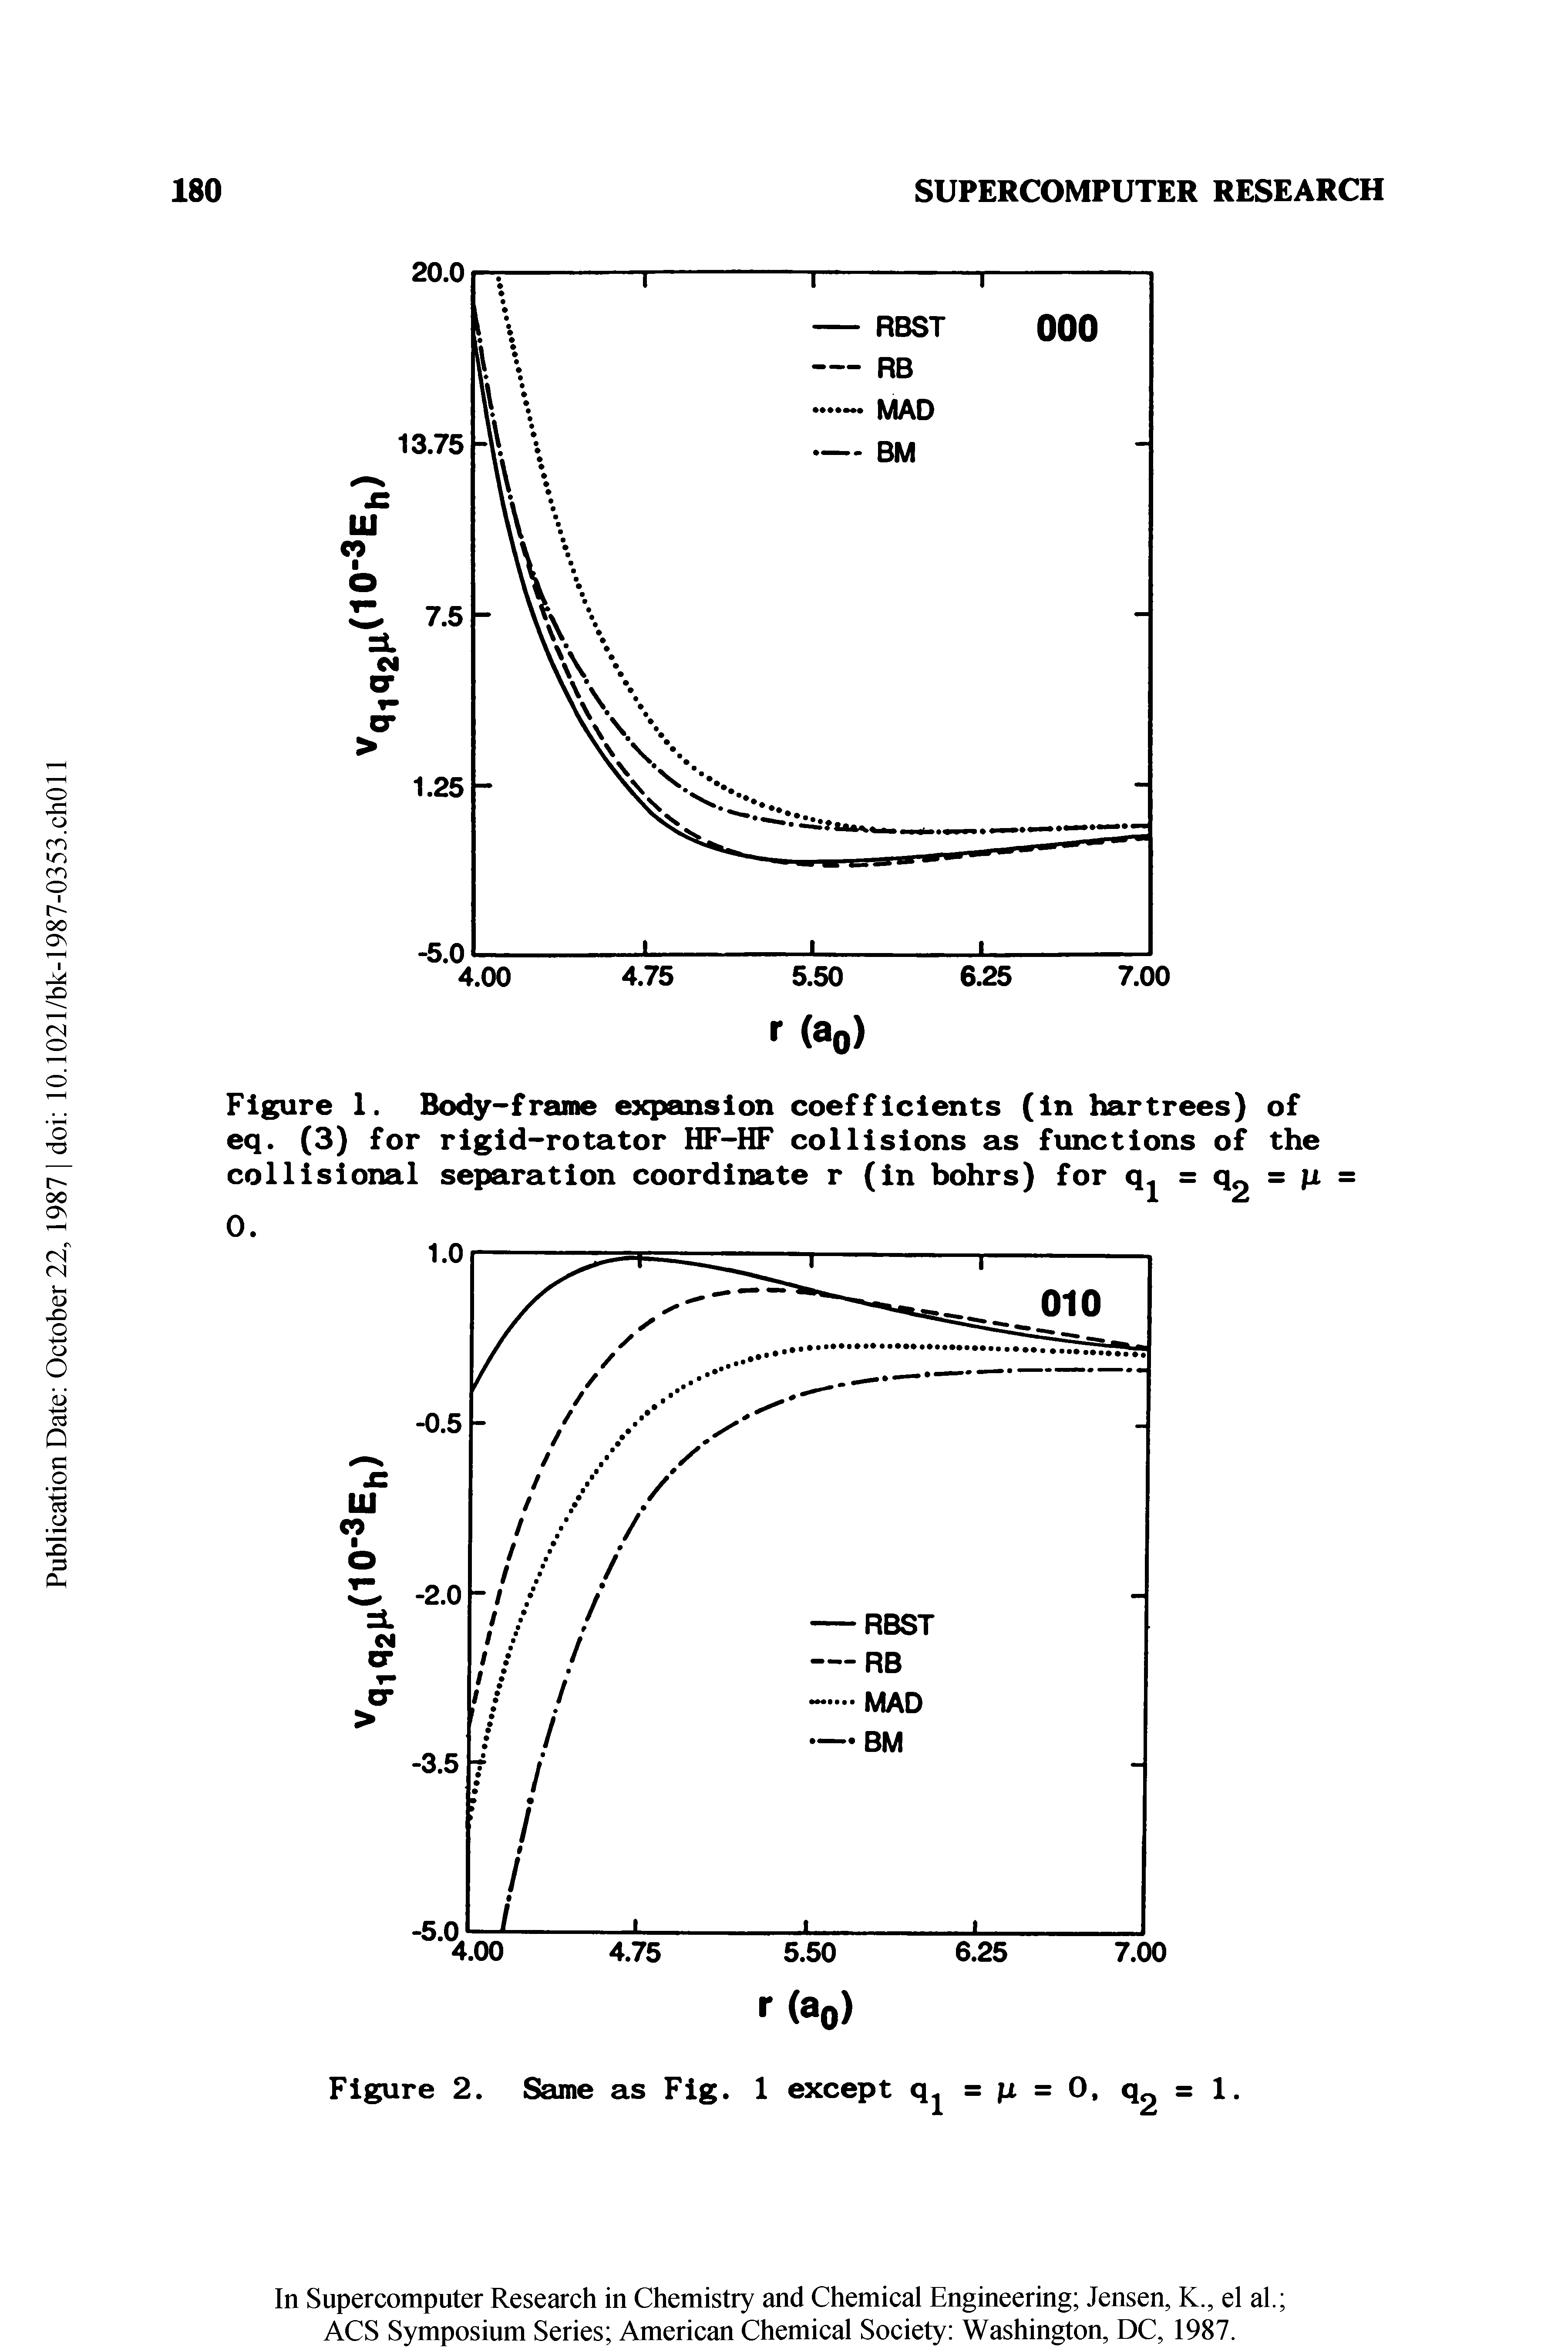 Figure 1. Body-frame expansion coefficients (in hartrees) of eq. (3) for rigid-rotator HF-HF collisions as functions of the collisional separation coordinate r (in bohrs) for = fx...